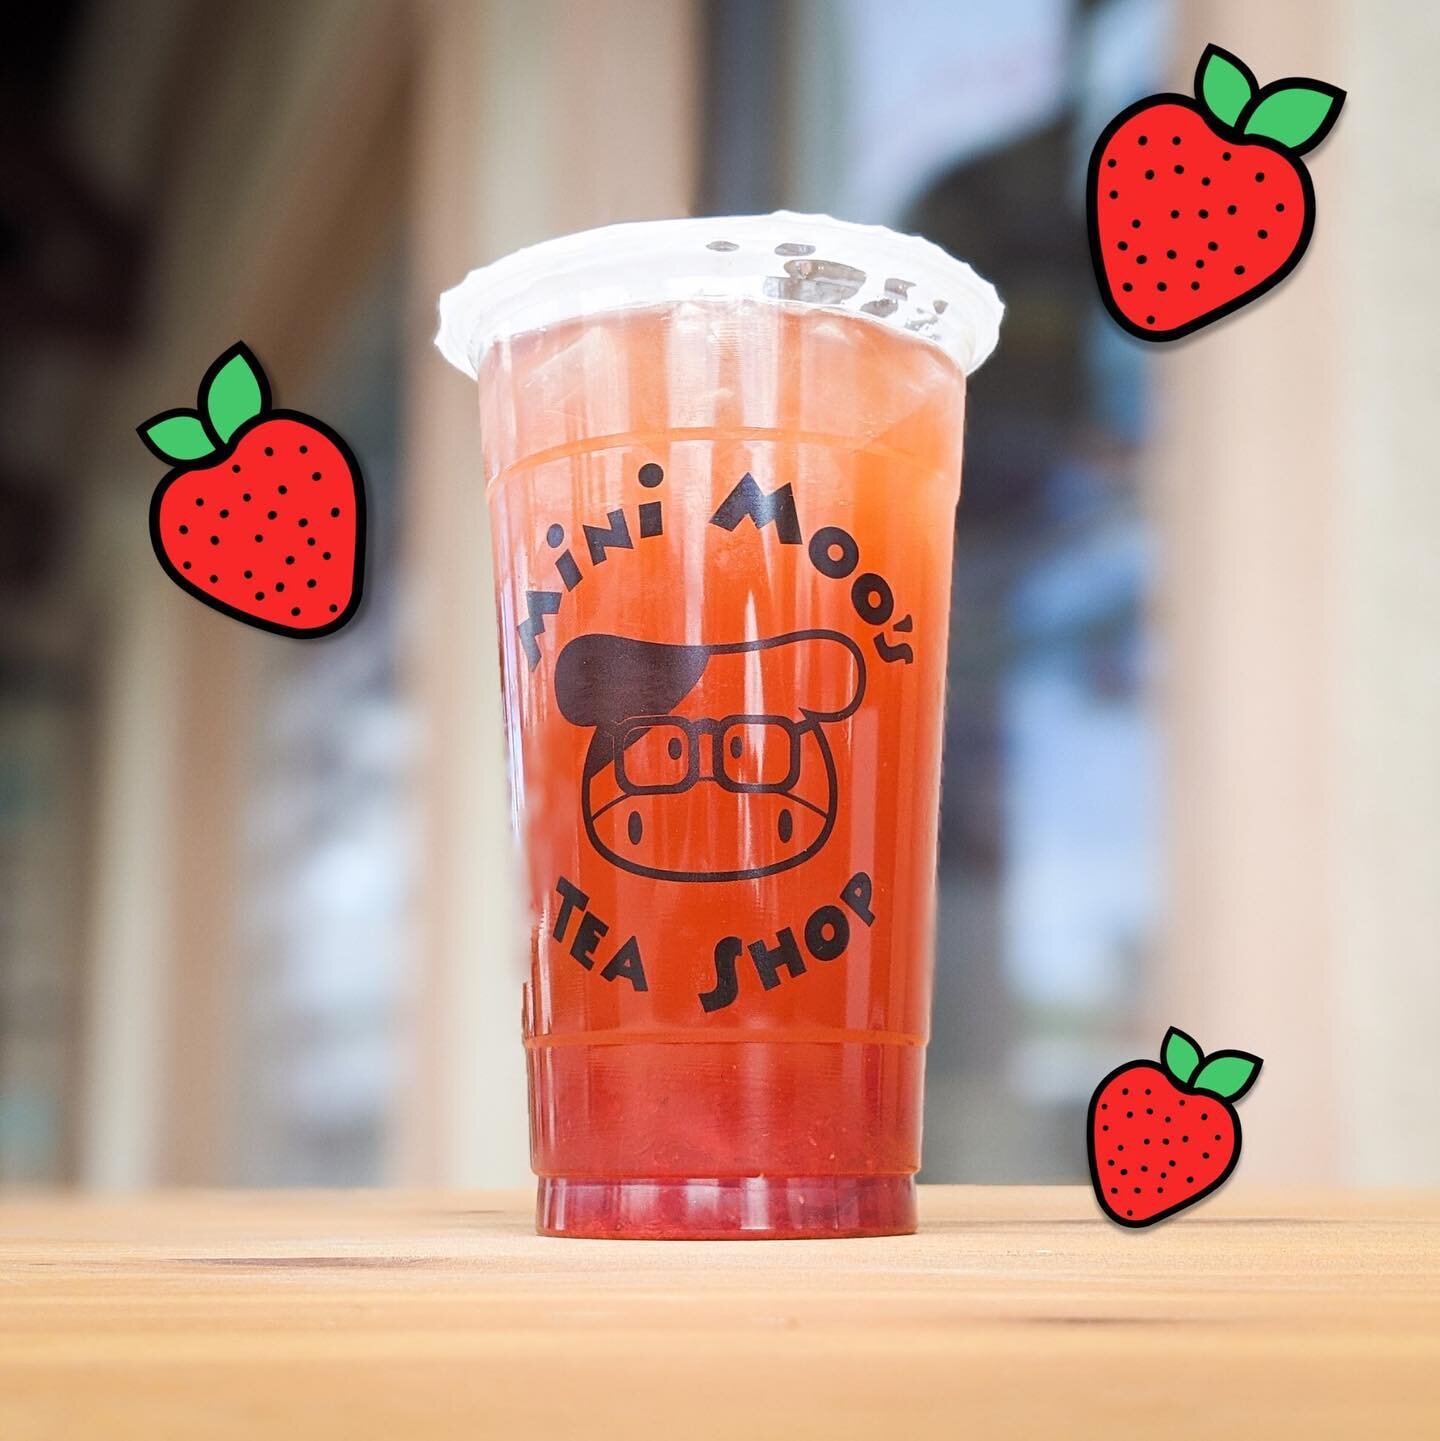 HAPPY FRIDAY‼️Get your weekend started early with a refreshing Strawberry green tea. 🍓 🍓 👅.
.
.
.
#strawberry #strawberrytea #greentea #strawberrygreentea #refreshingdrink #bobatea